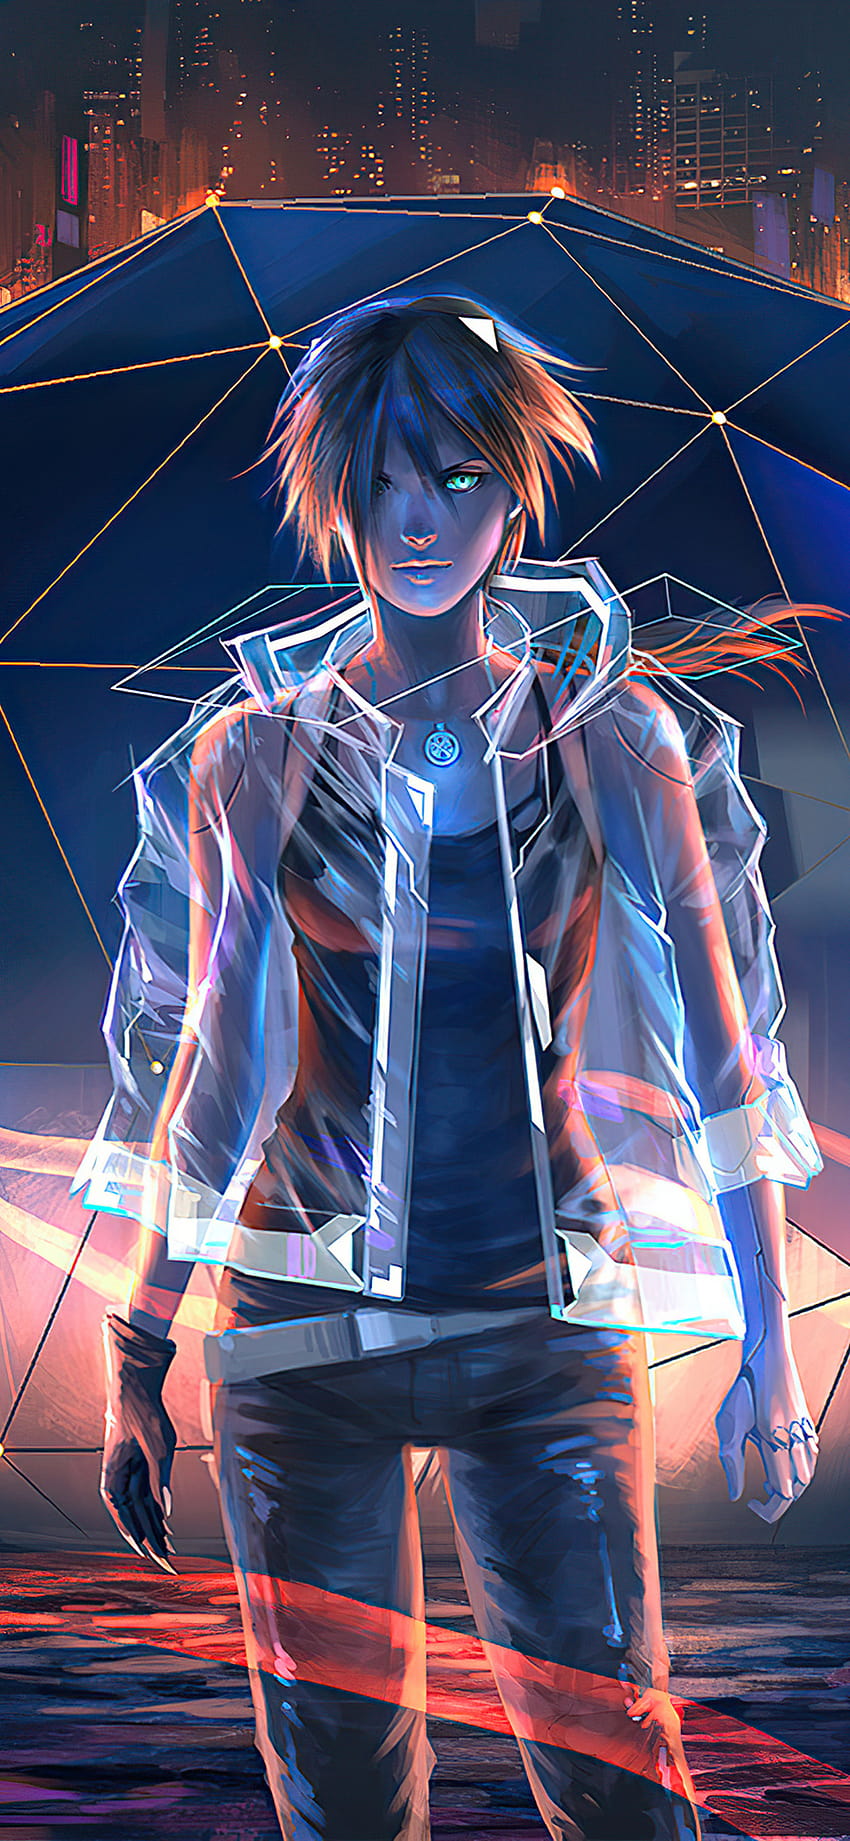 1125x2436 Night City Anime Boy Iphone XS,Iphone 10,Iphone X , Backgrounds, and HD phone wallpaper